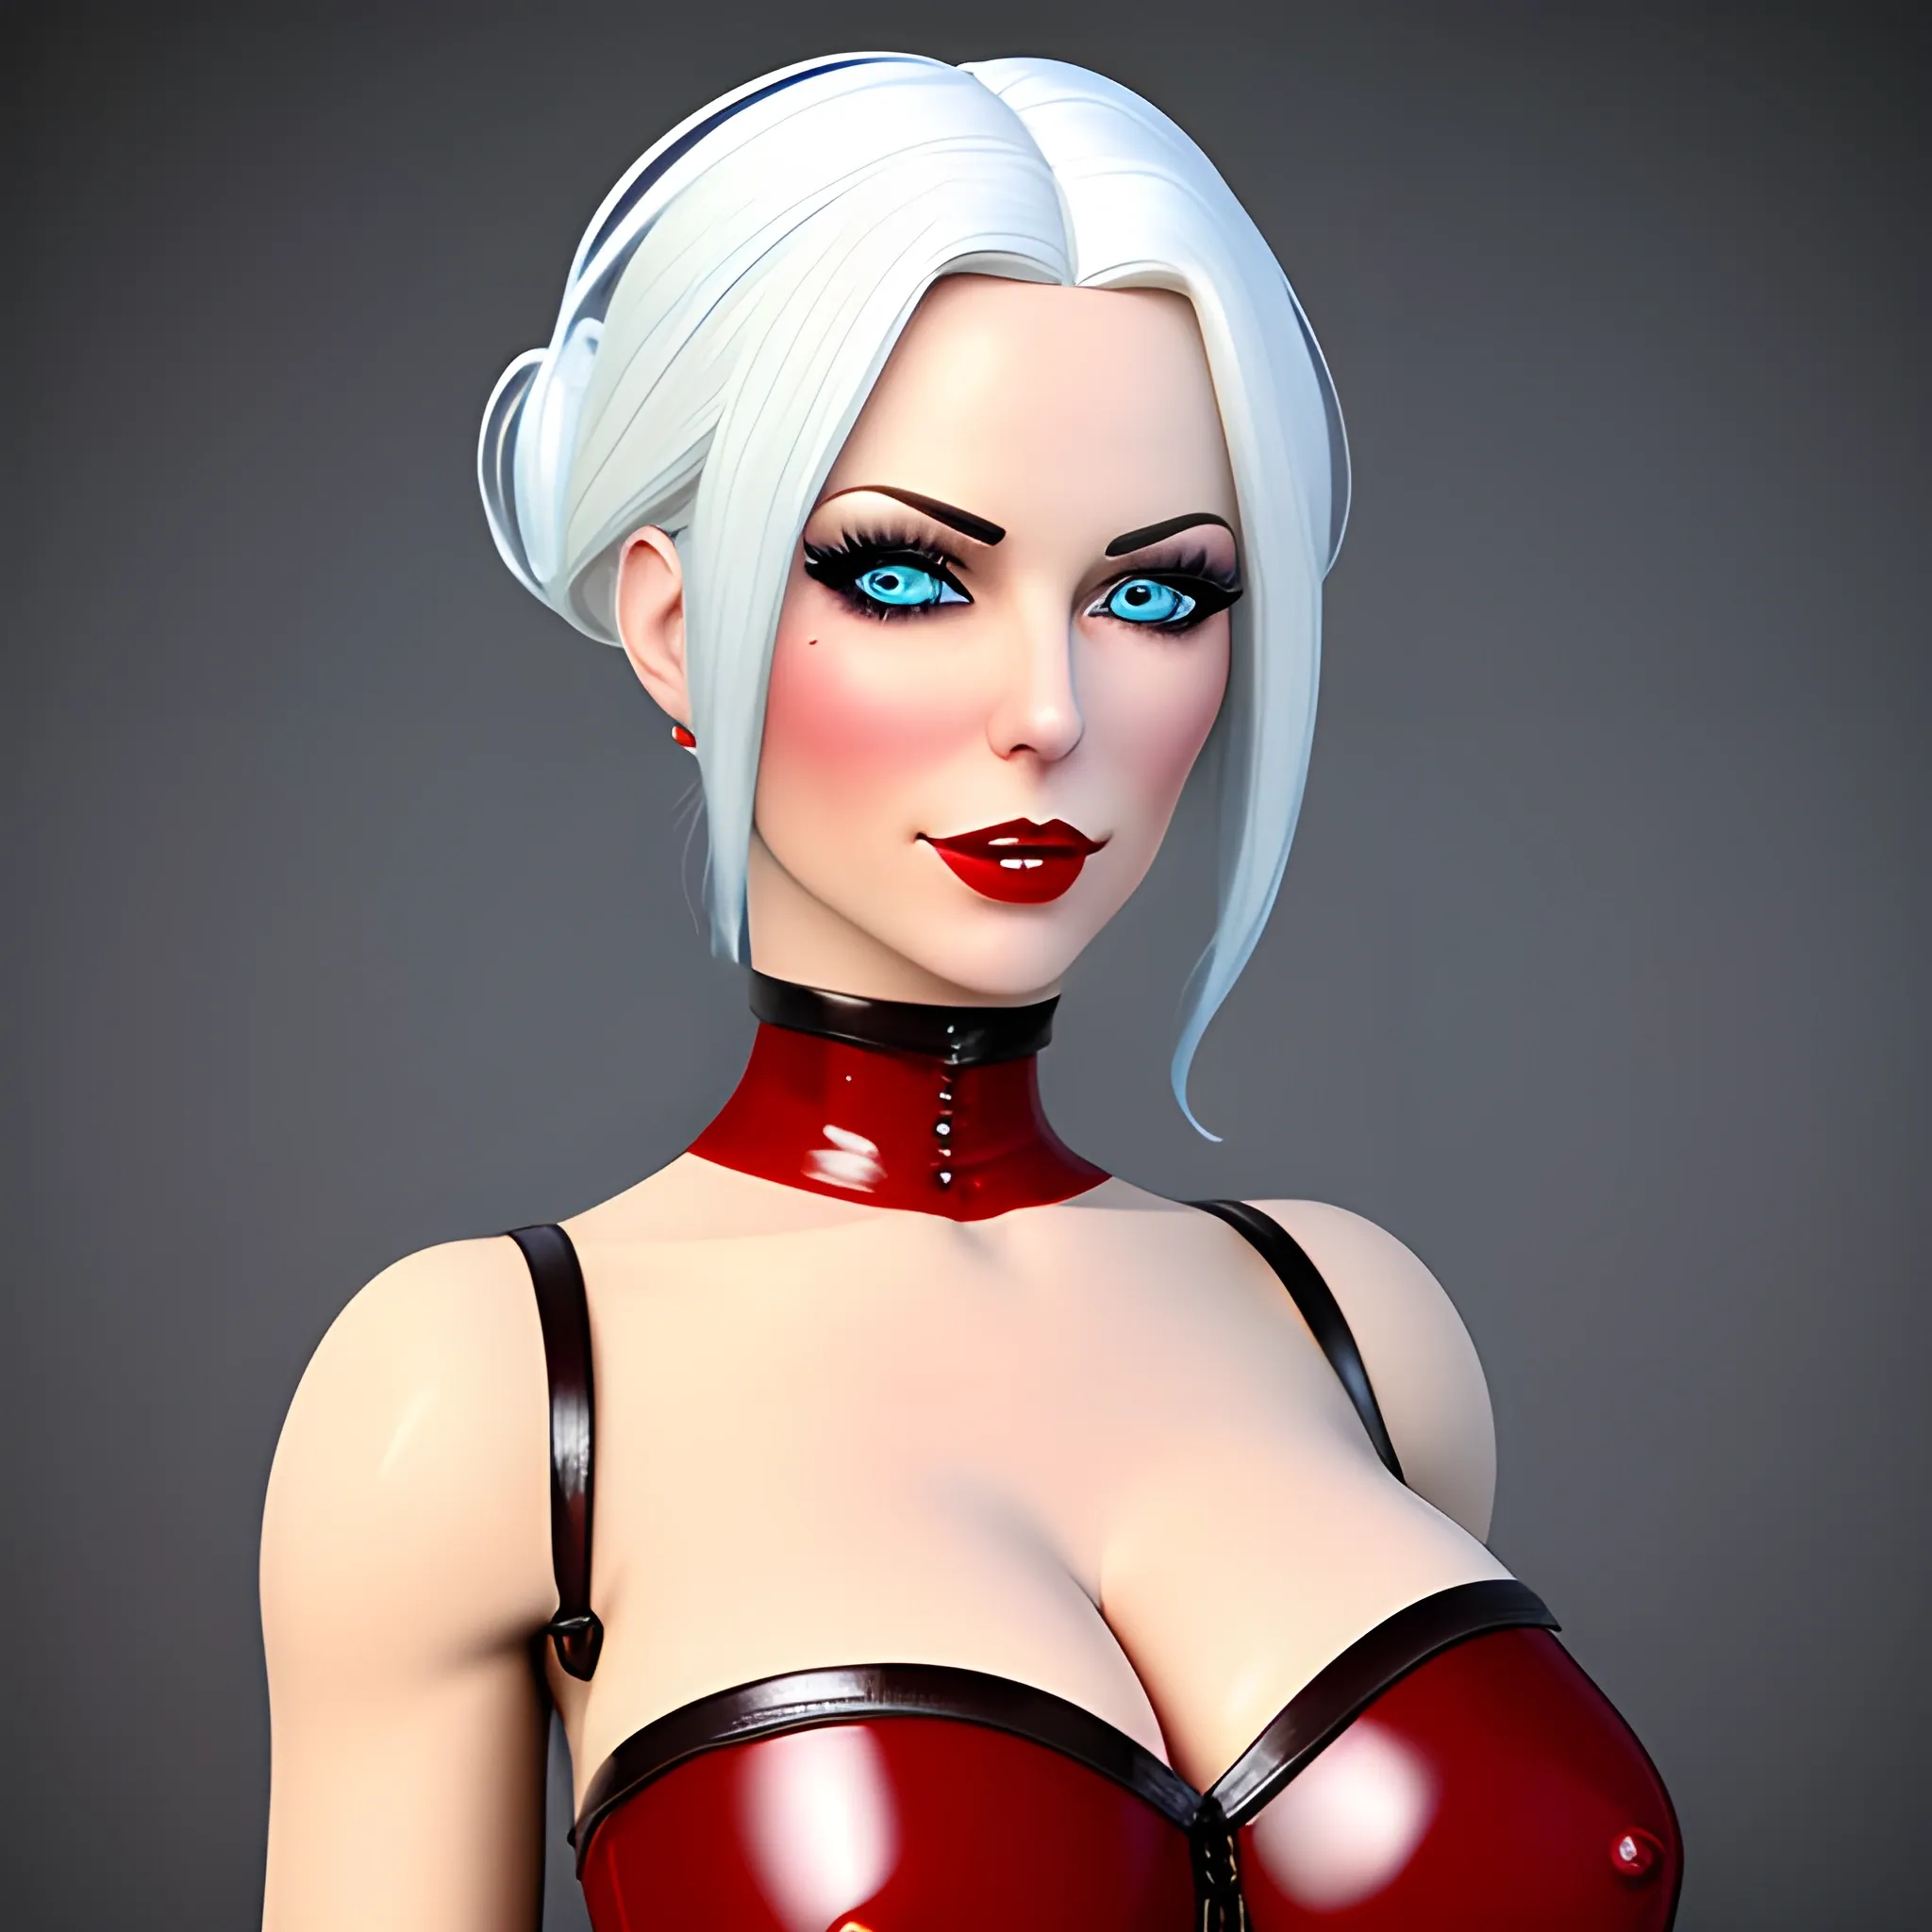 Create a photorealistic image of a cute young girl with white hair and light blue eyes, she has small breasts that are naked and visible, she wears a red dress from the Victorian era in latex and leather, she holds a doll in her hands, Pretty eyes, Sweet mouth, Highest level of detail